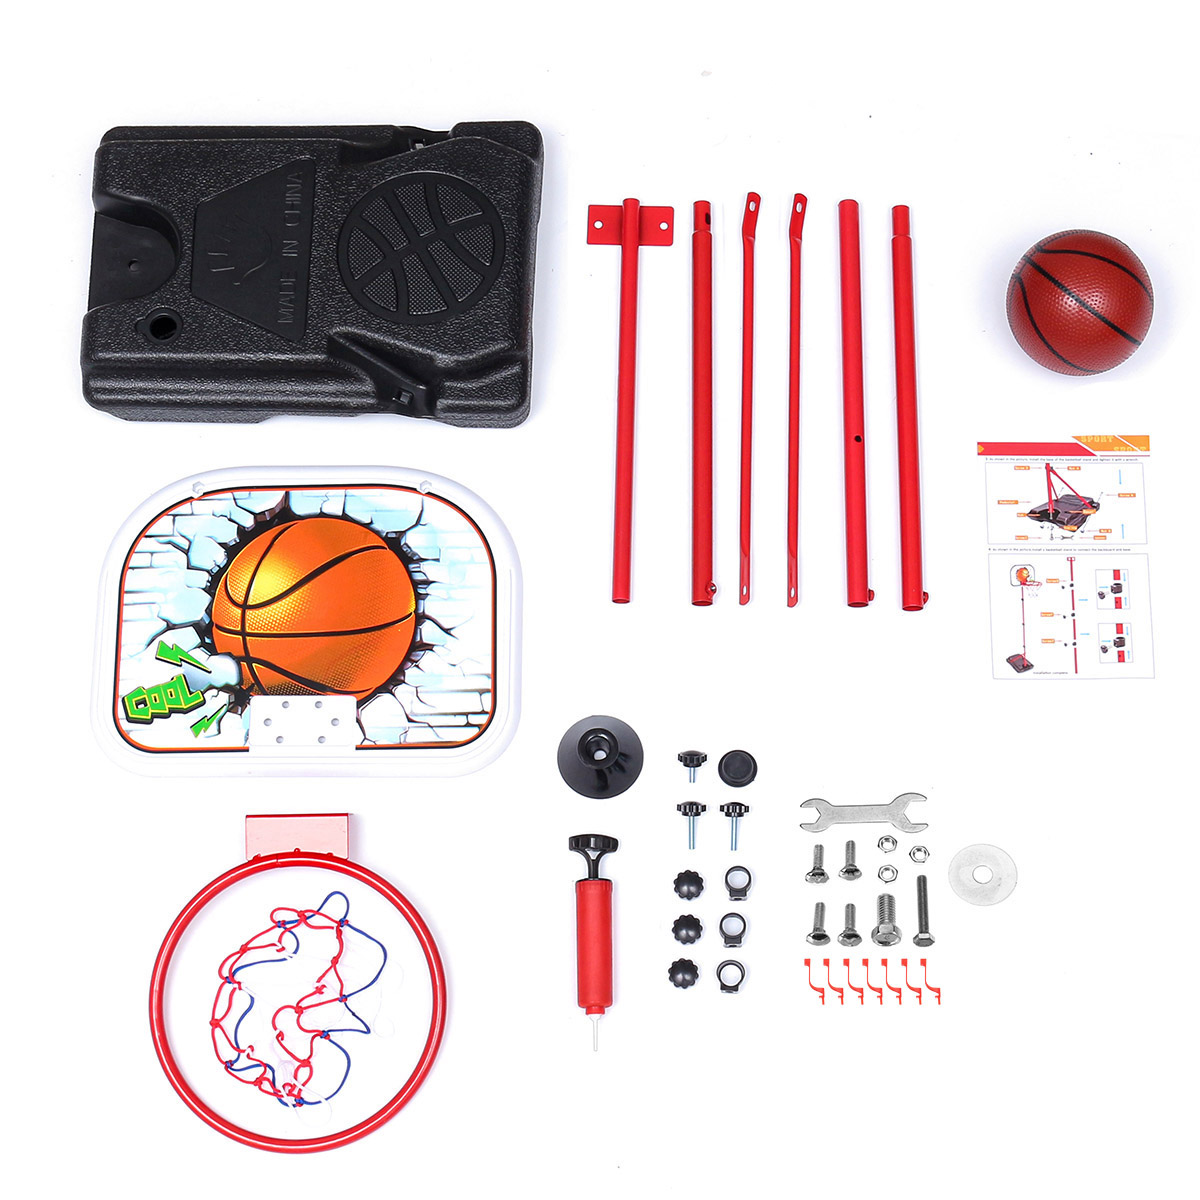 Liftable-Tire-Iron-Frame-Basketball-Stand-Childrens-Outdoor-Indoor-Sports-Shooting-Frame-Toys-1636599-8